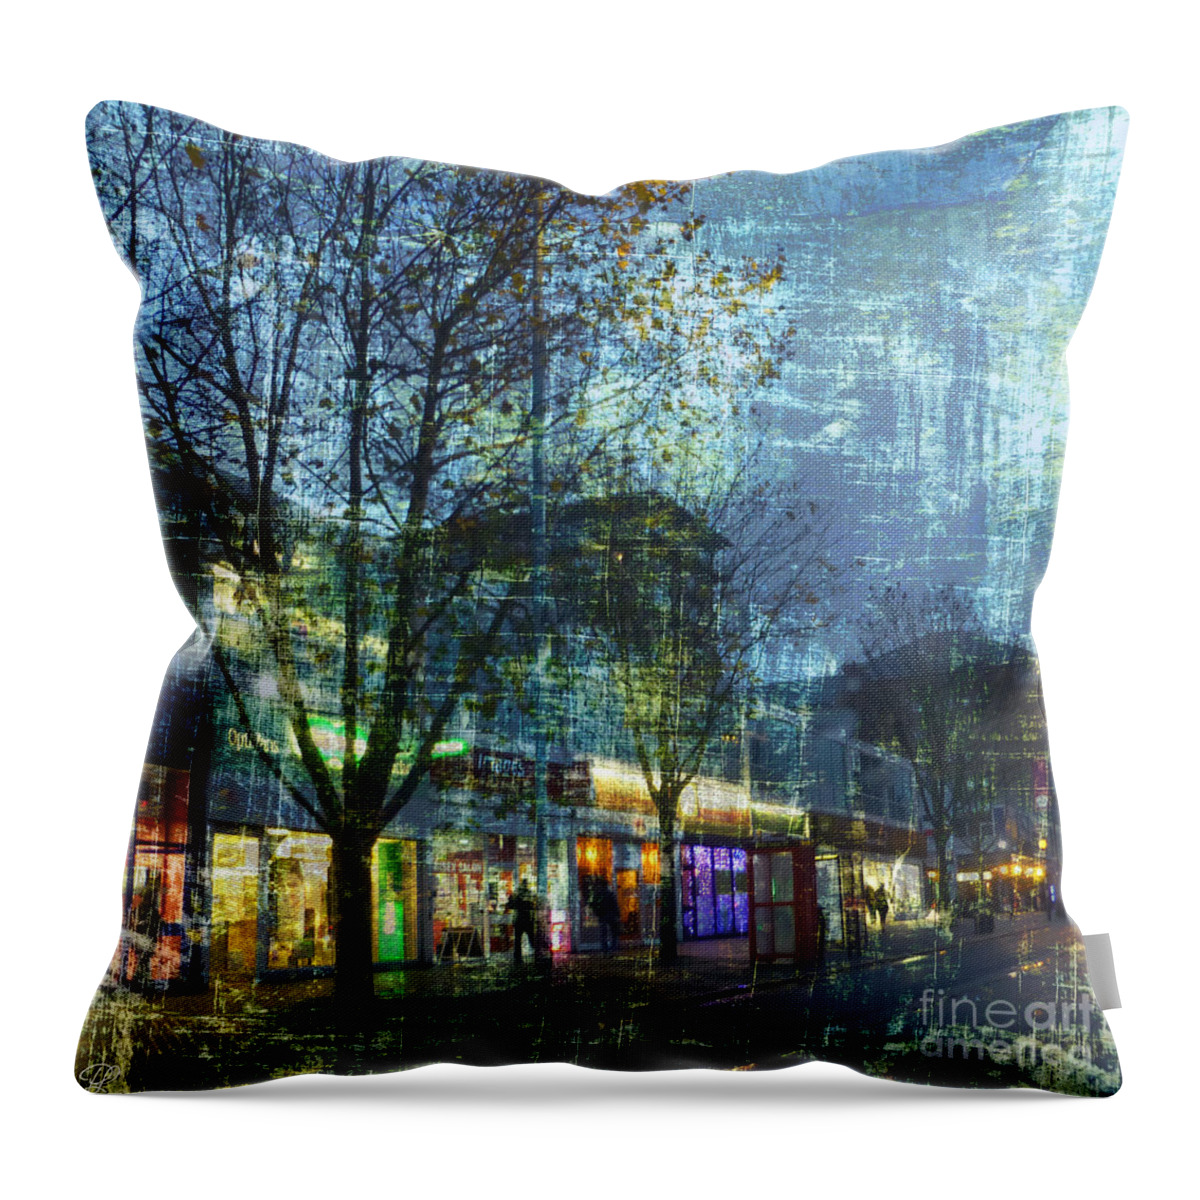 Afternoon Throw Pillow featuring the photograph Late Afternoon in Autumn by LemonArt Photography